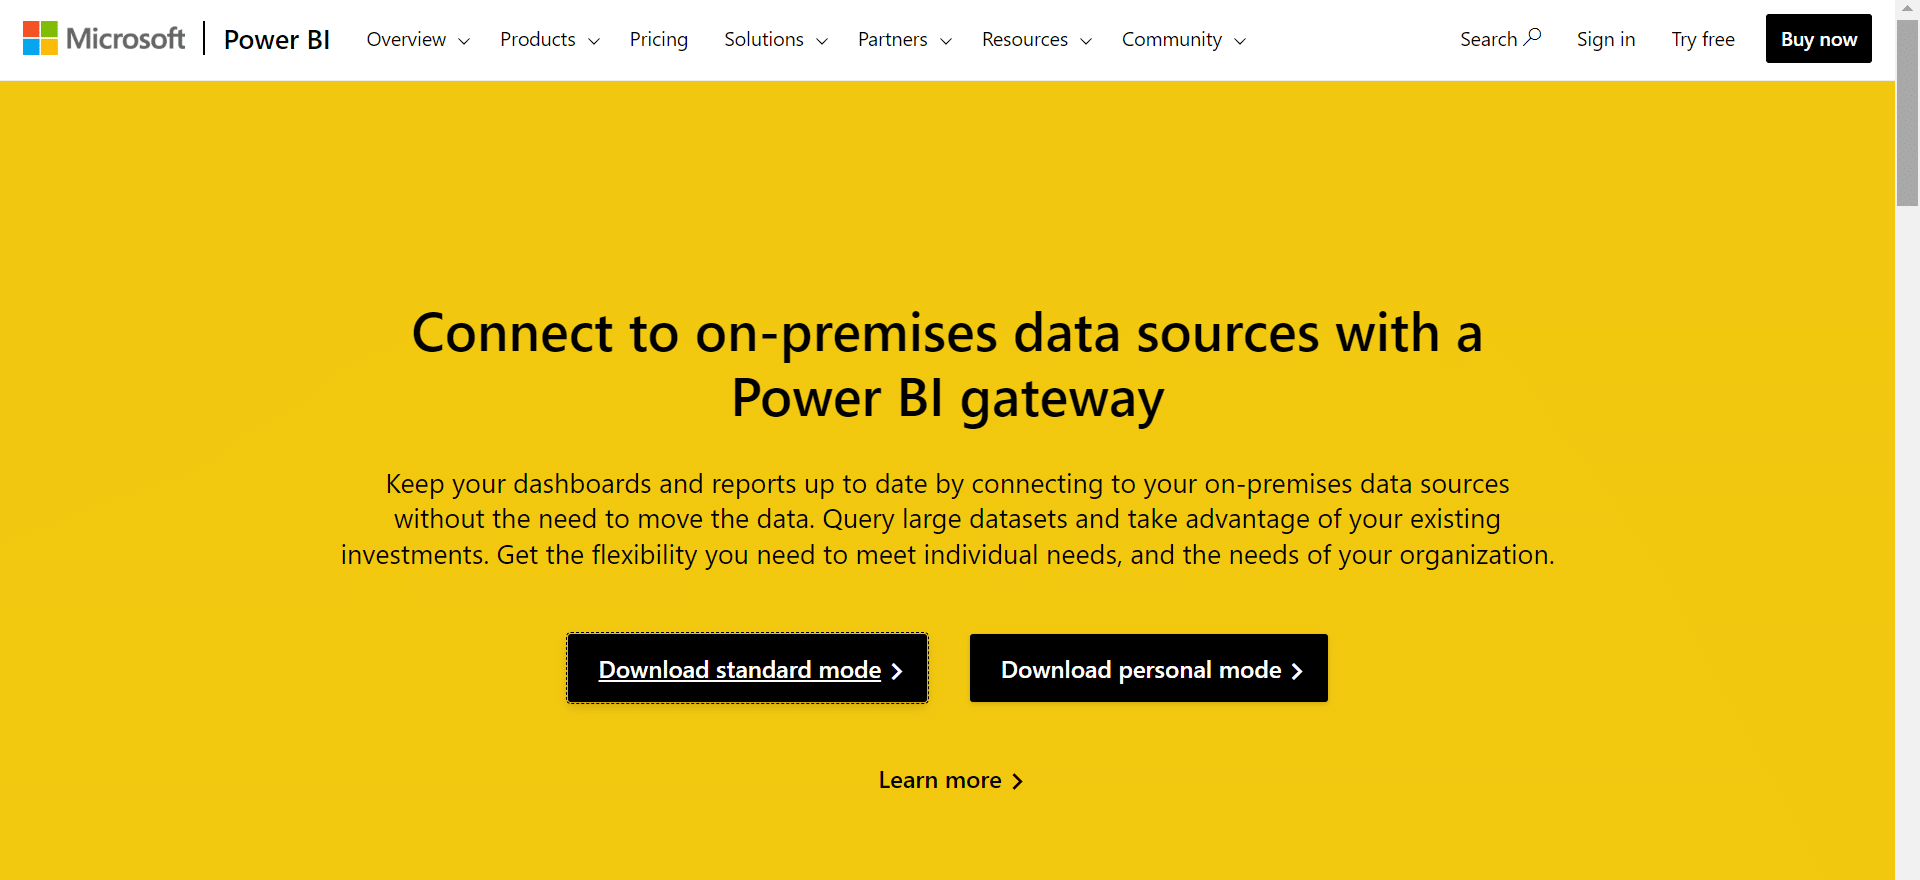 How to download the standard and the personal mode of the Power BI gateway